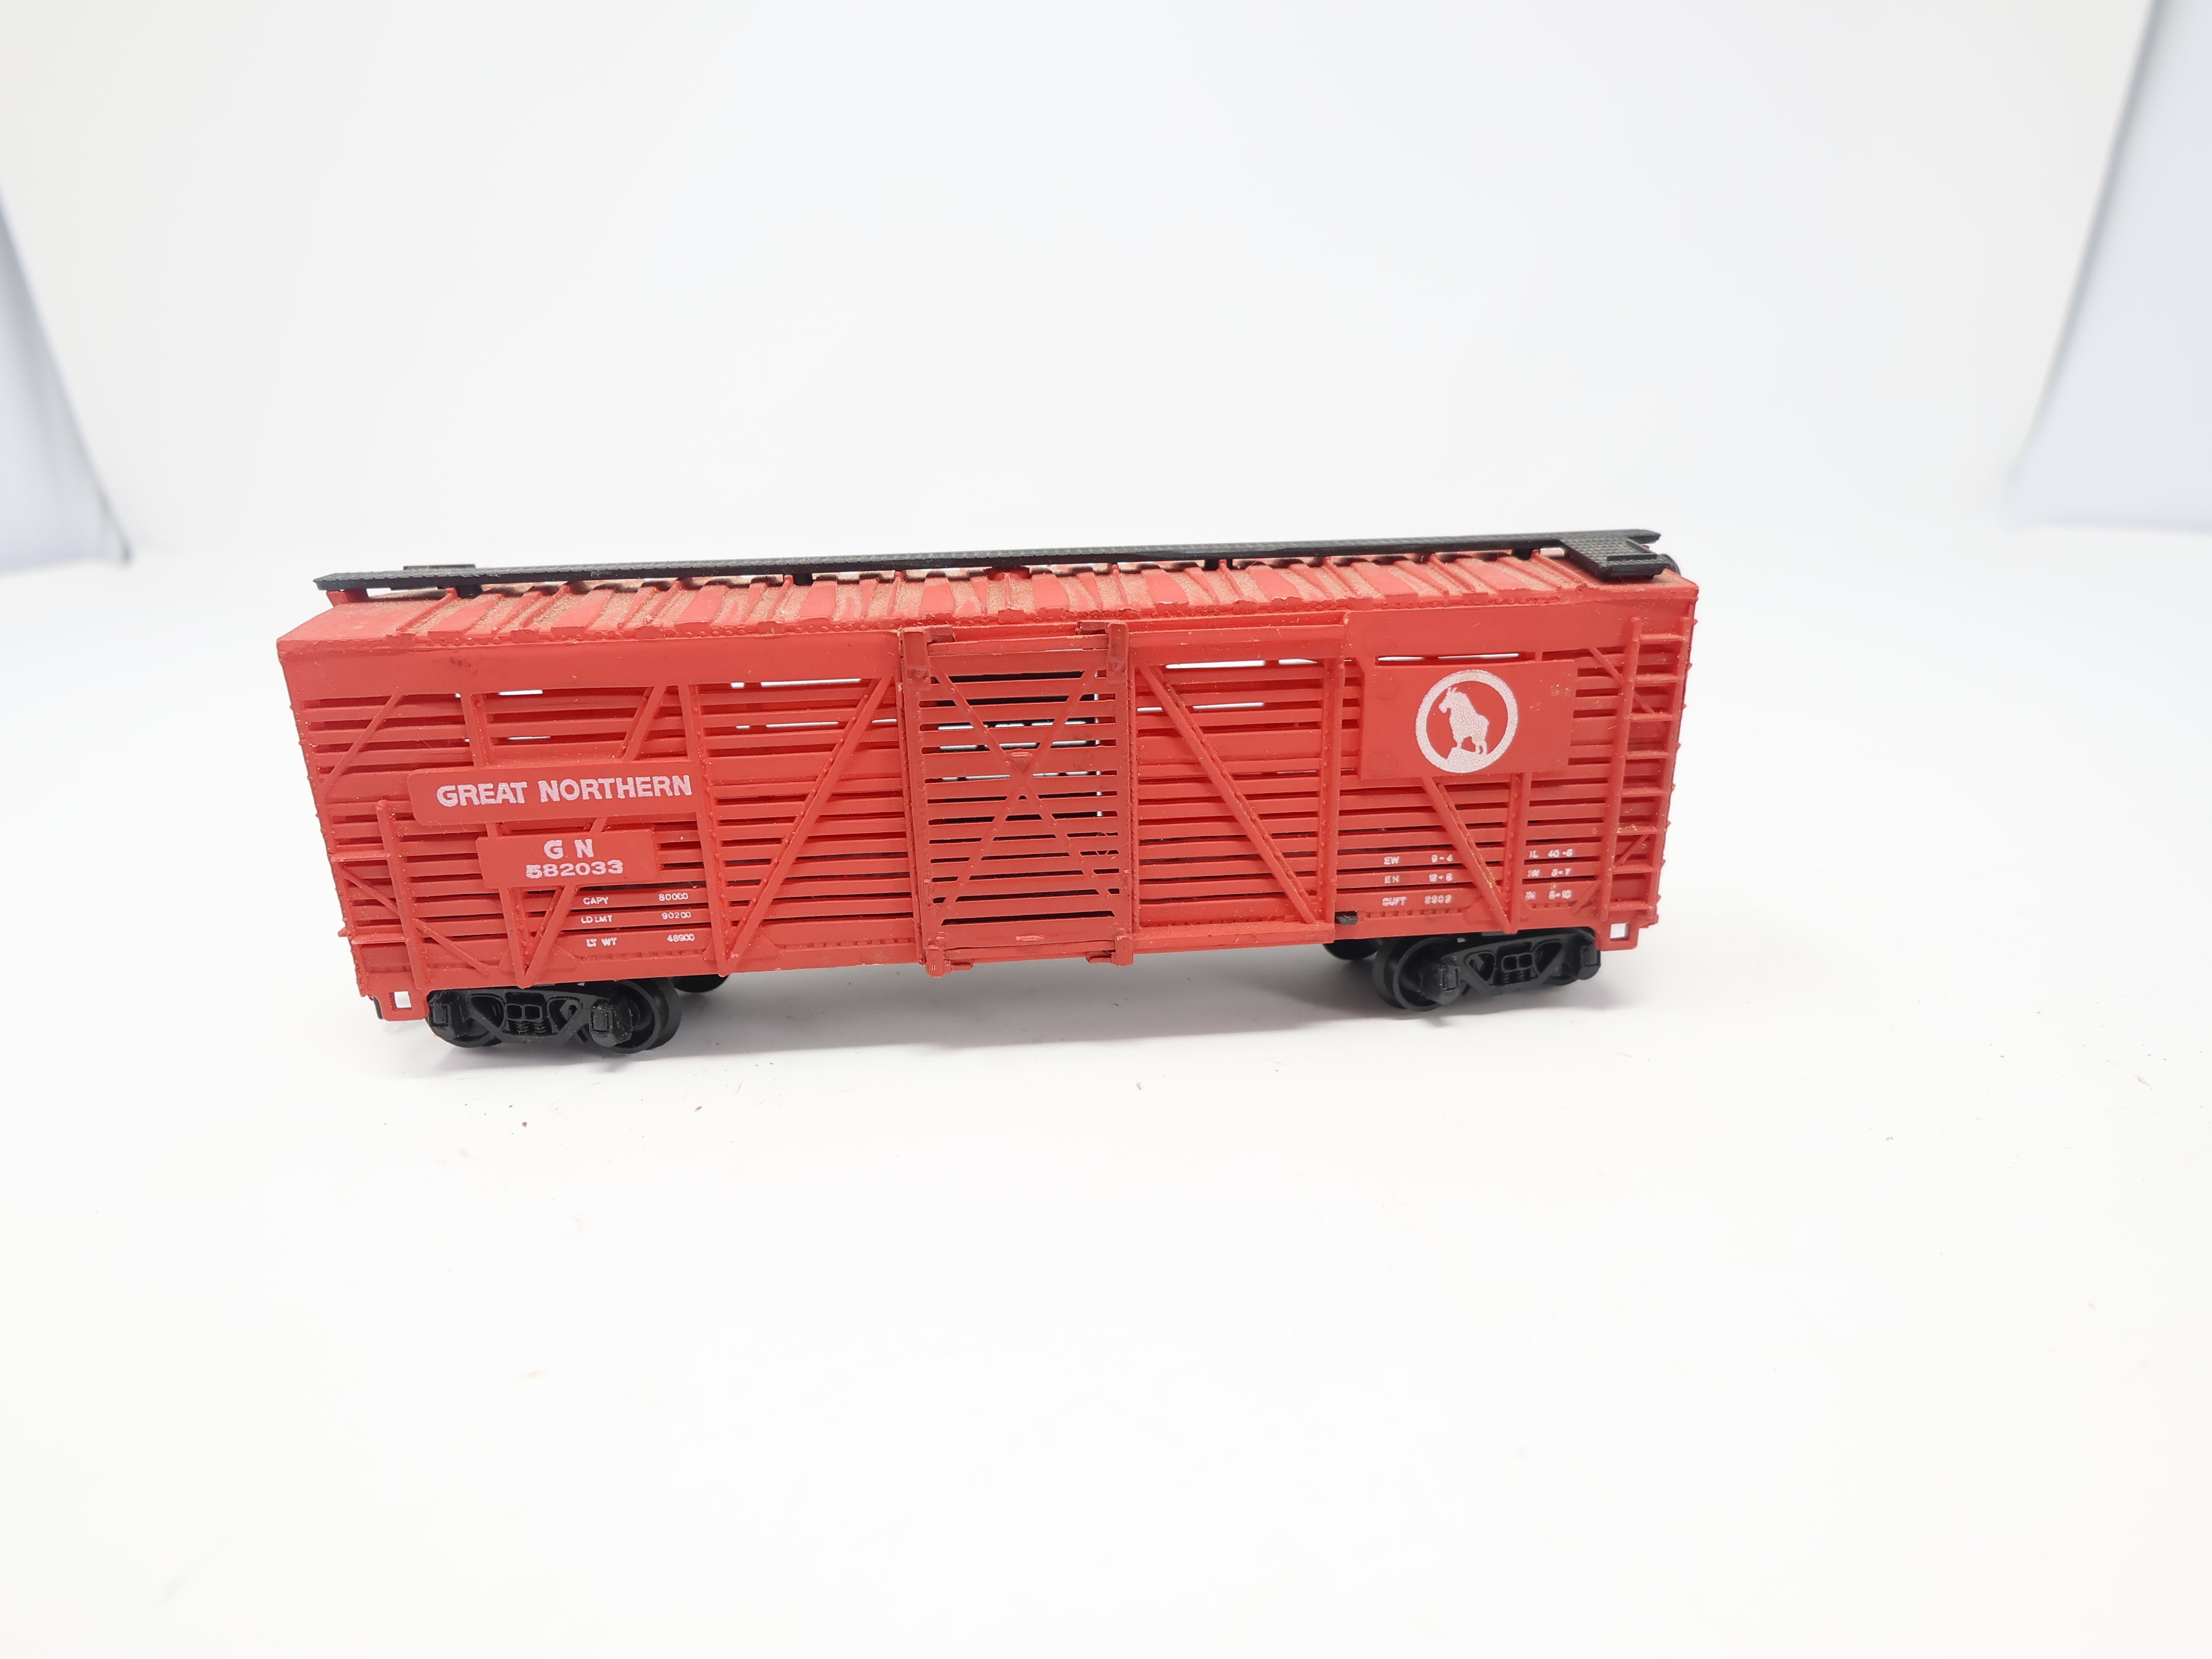 USED AHM HO Scale, 40' Stock Car, Great Northern GN #582033